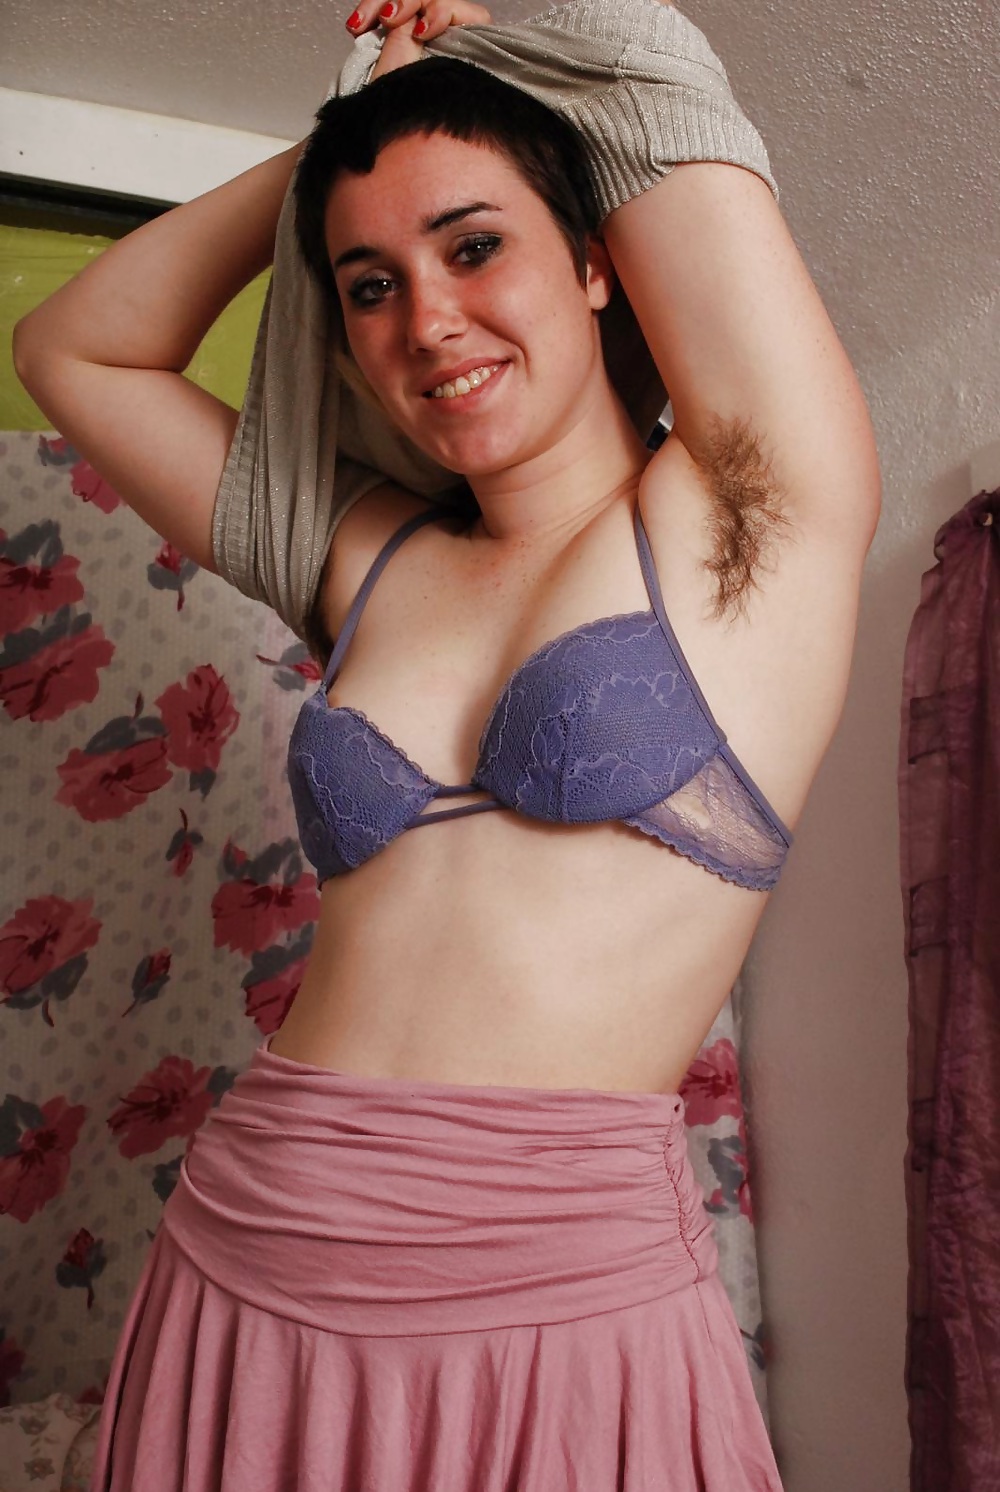 Miscellaneous girls showing hairy, unshaven armpits 3 #36174460